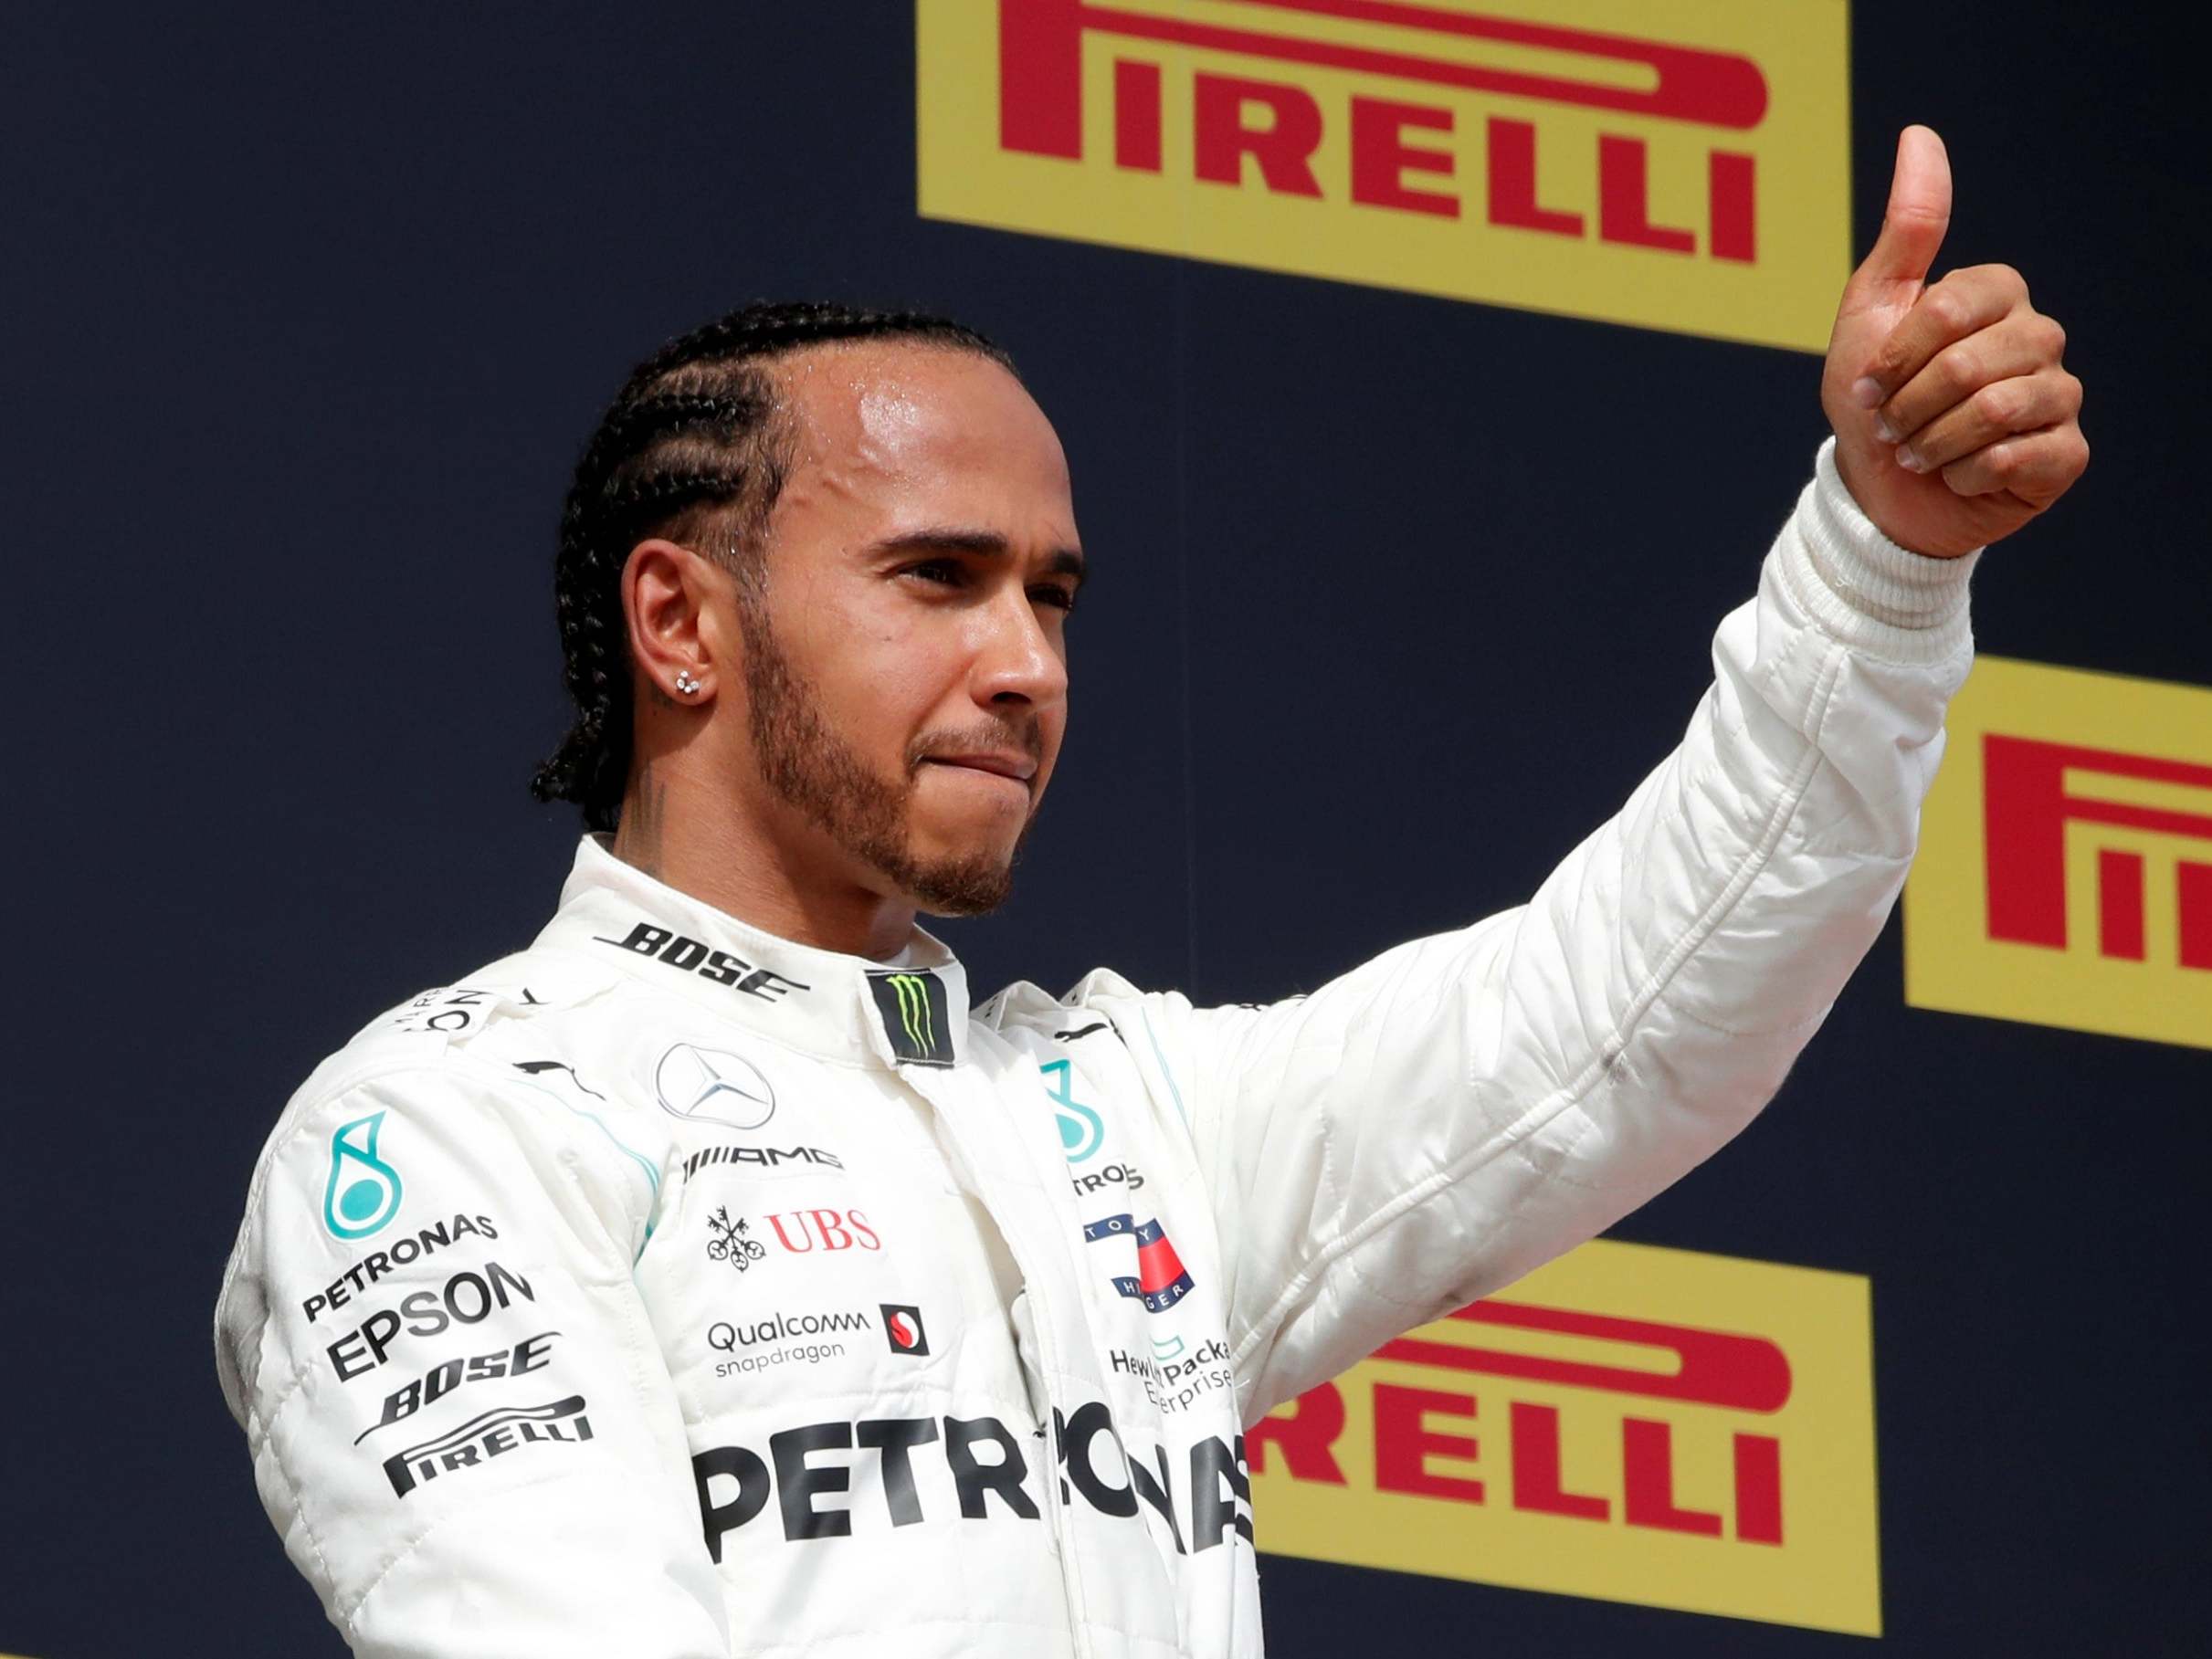 The sport will work with Lewis Hamilton to shape its future